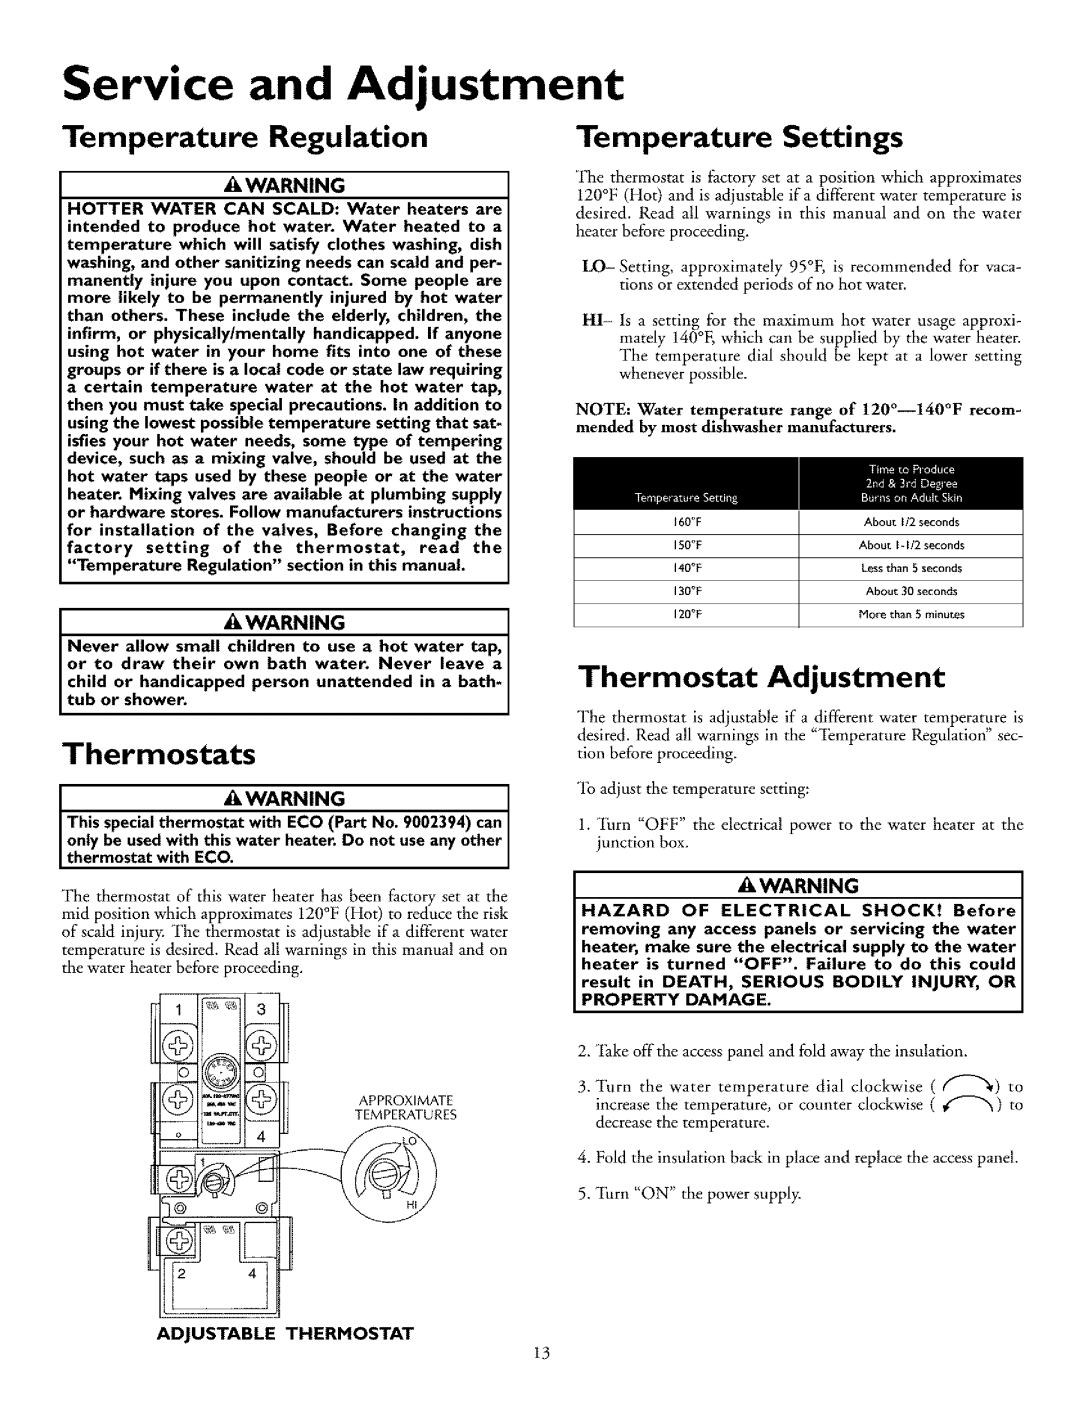 Kenmore 153.31702 Service and Adjustment, Temperature Regulation, Thermostats, Temperature Settings, Thermostat Adjustment 